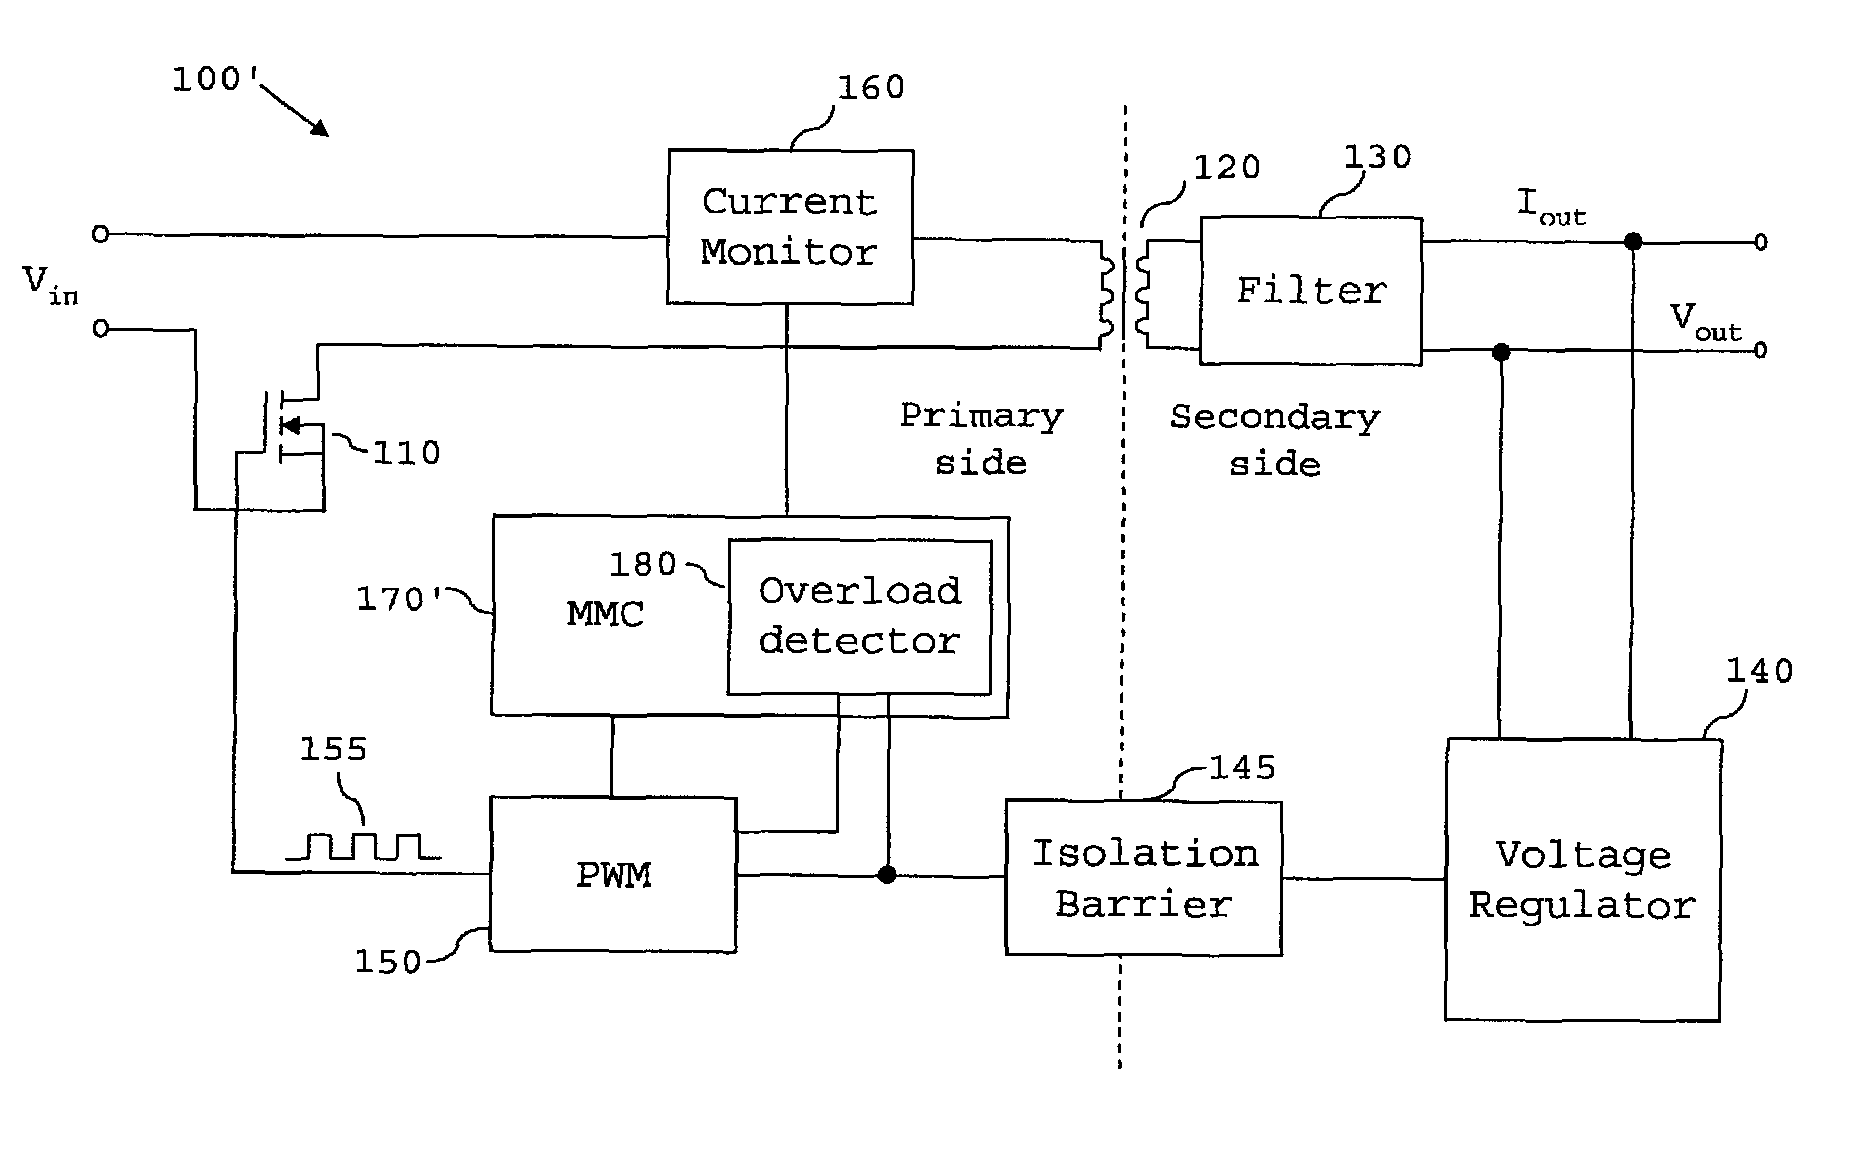 Overload detection in a switched mode power supply